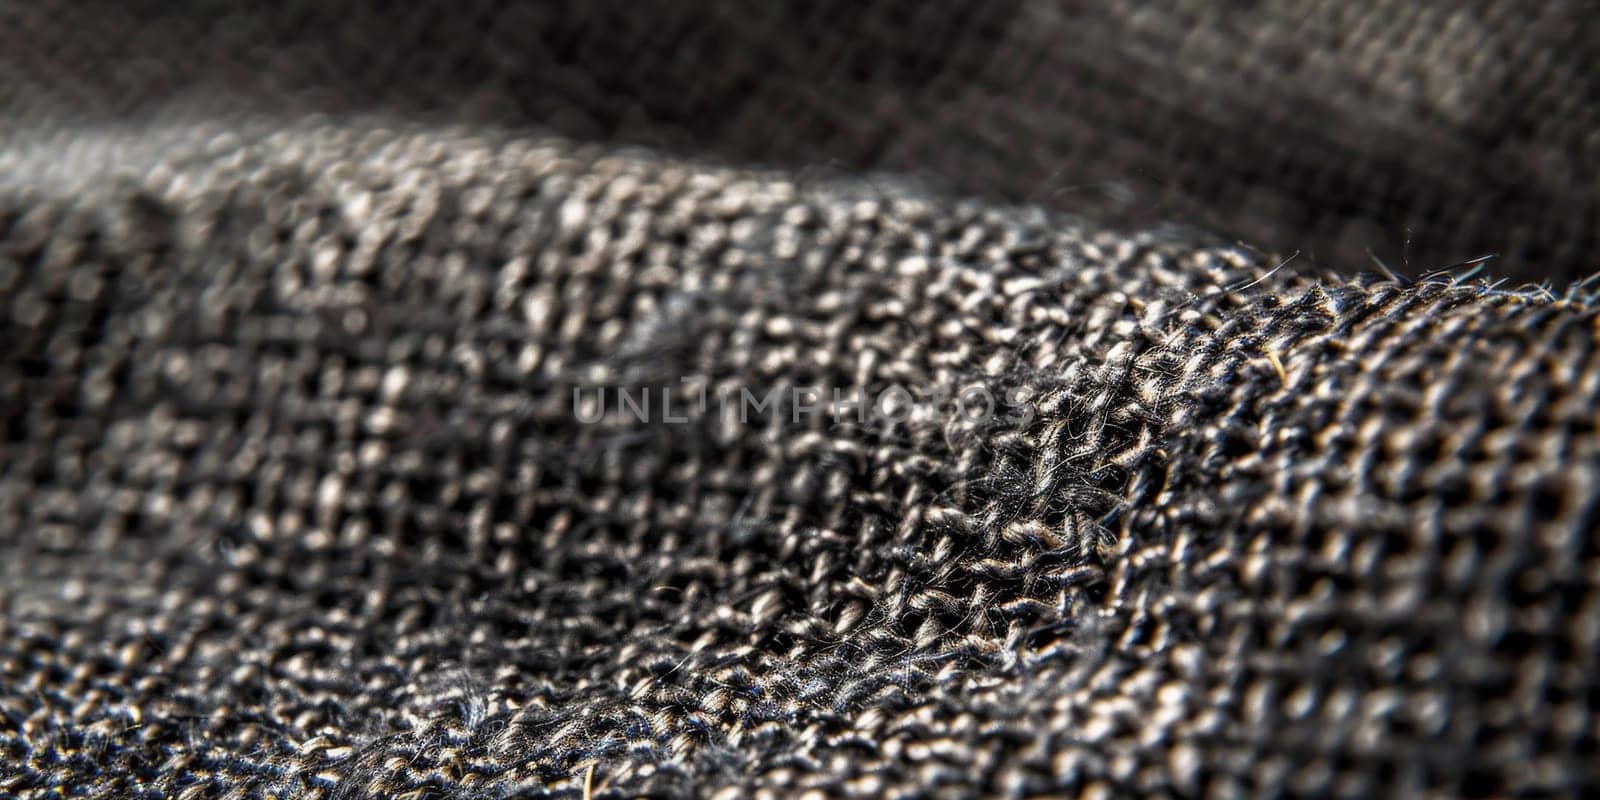 Close-ups of fabric textures, showcasing the weave, thread count, and a surface details